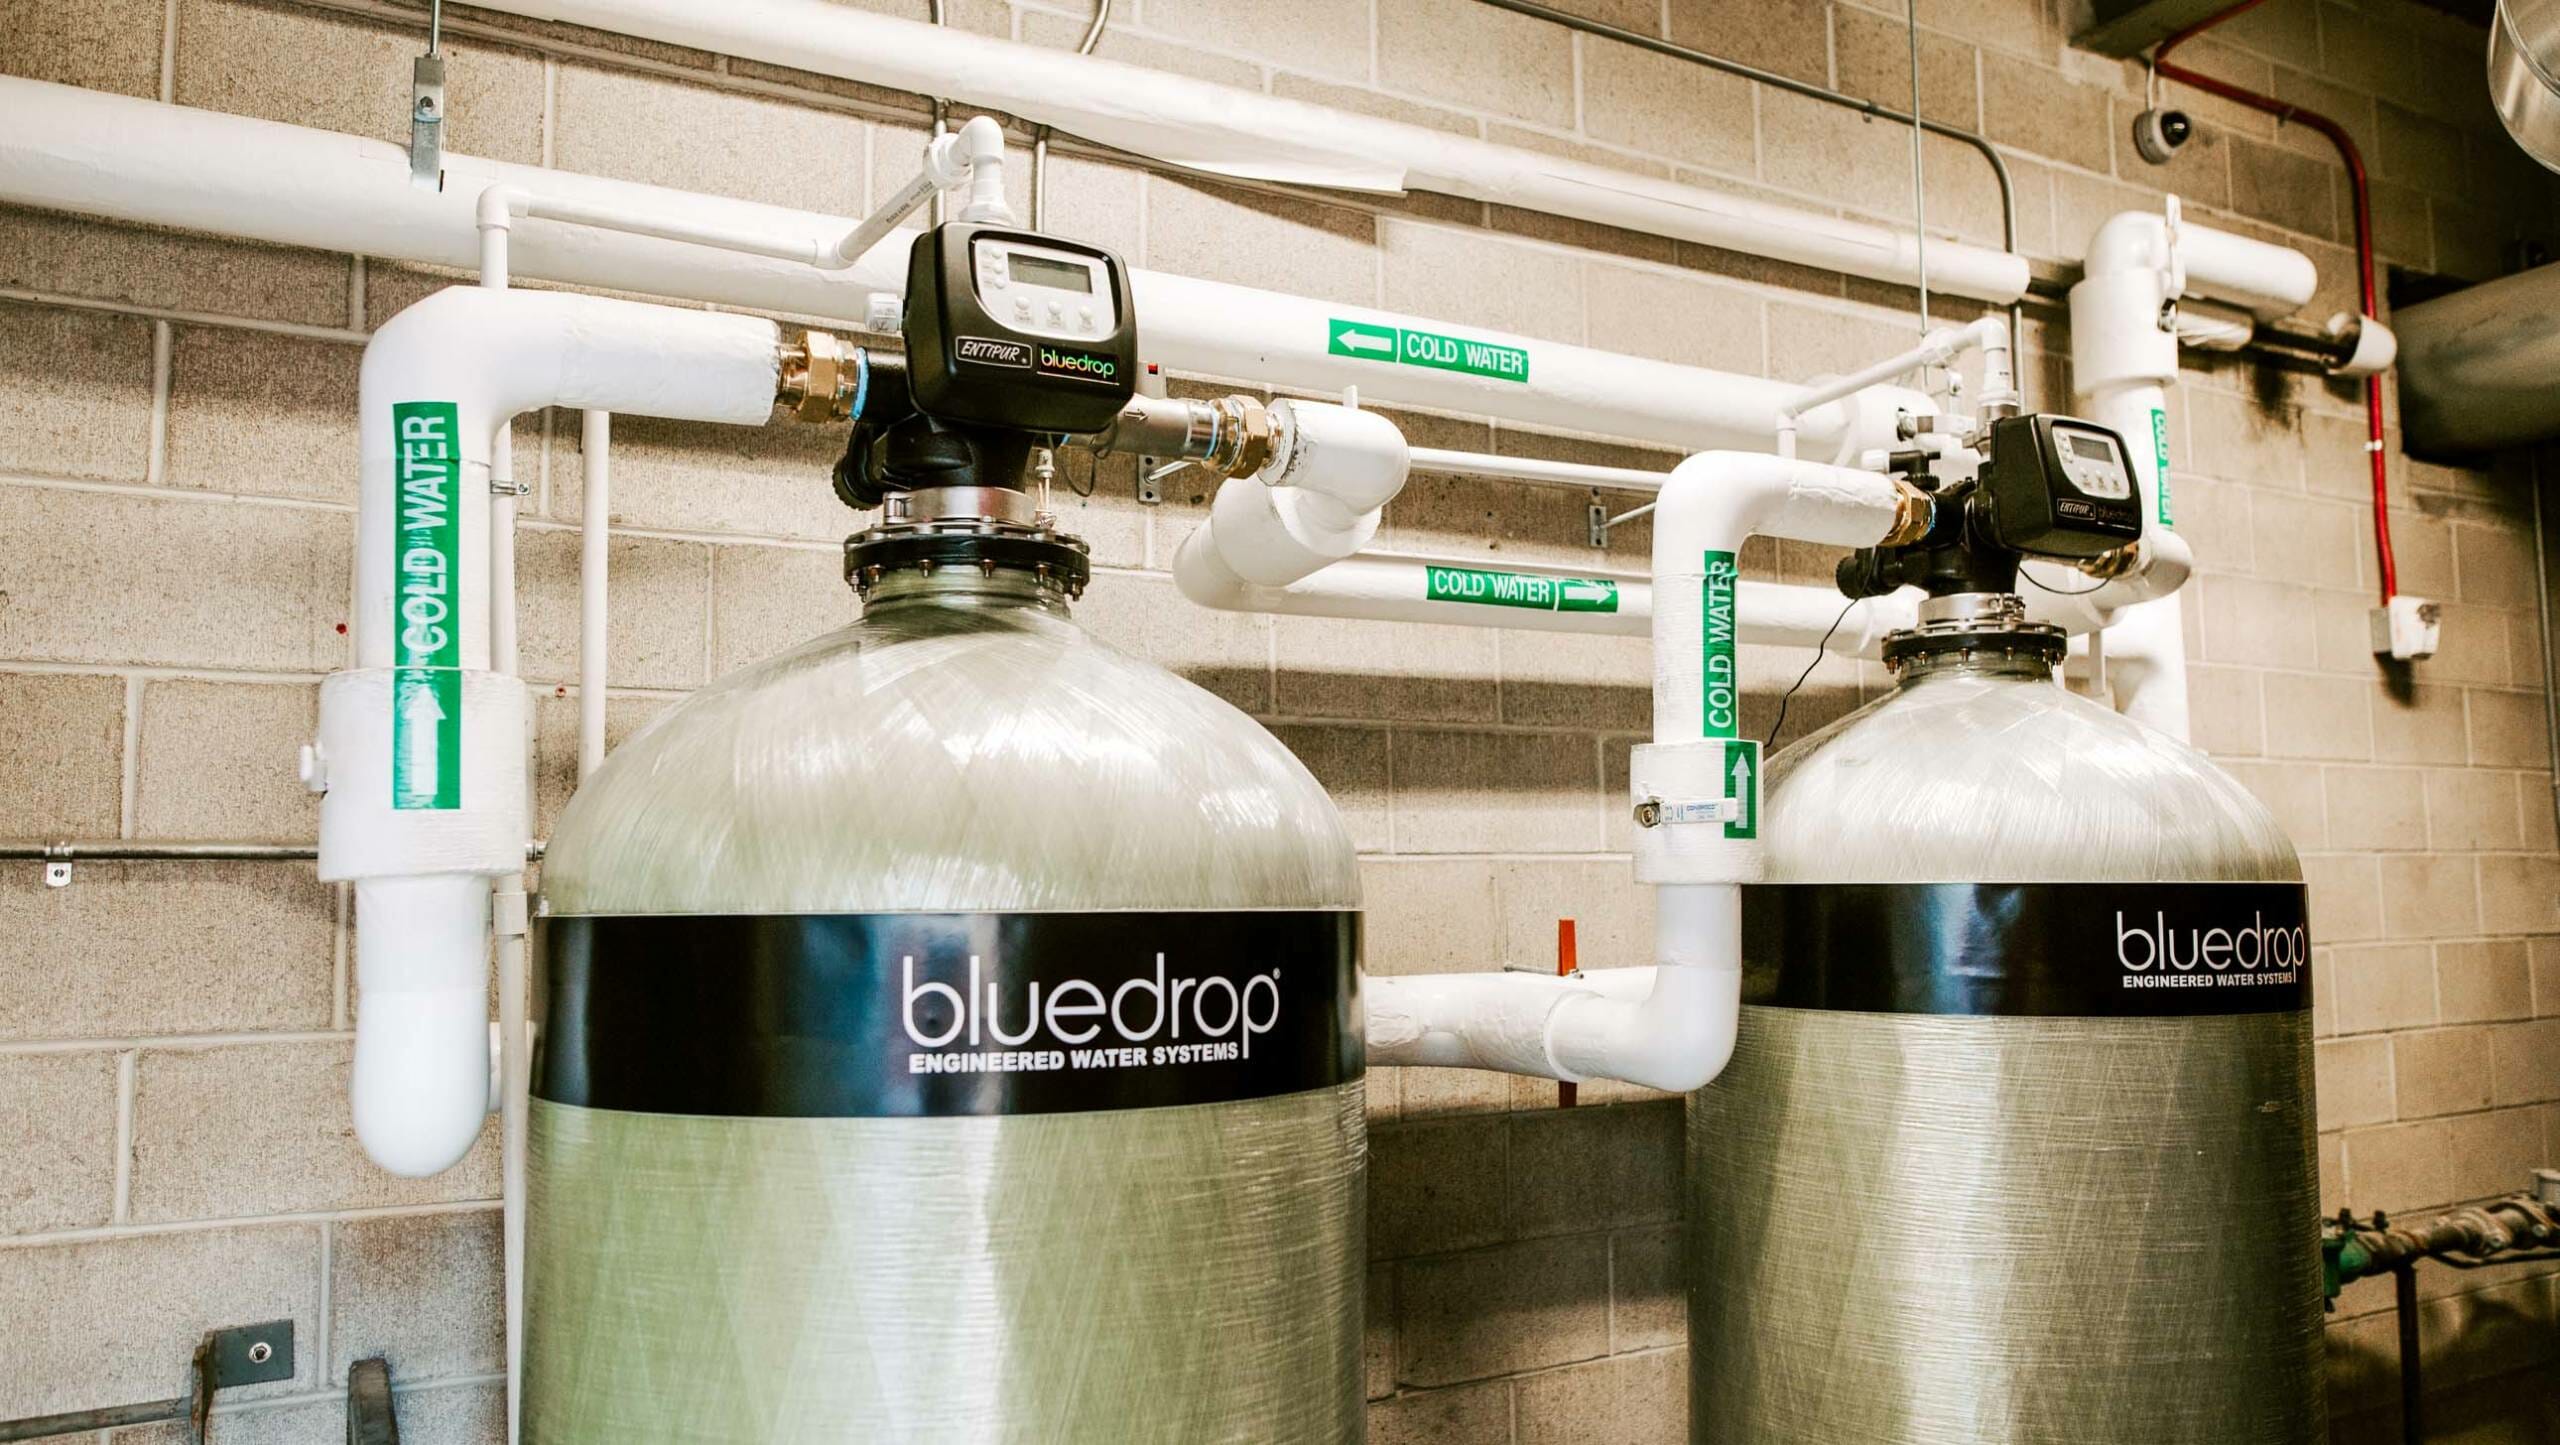 A bluedrop water engineered water system to filter.